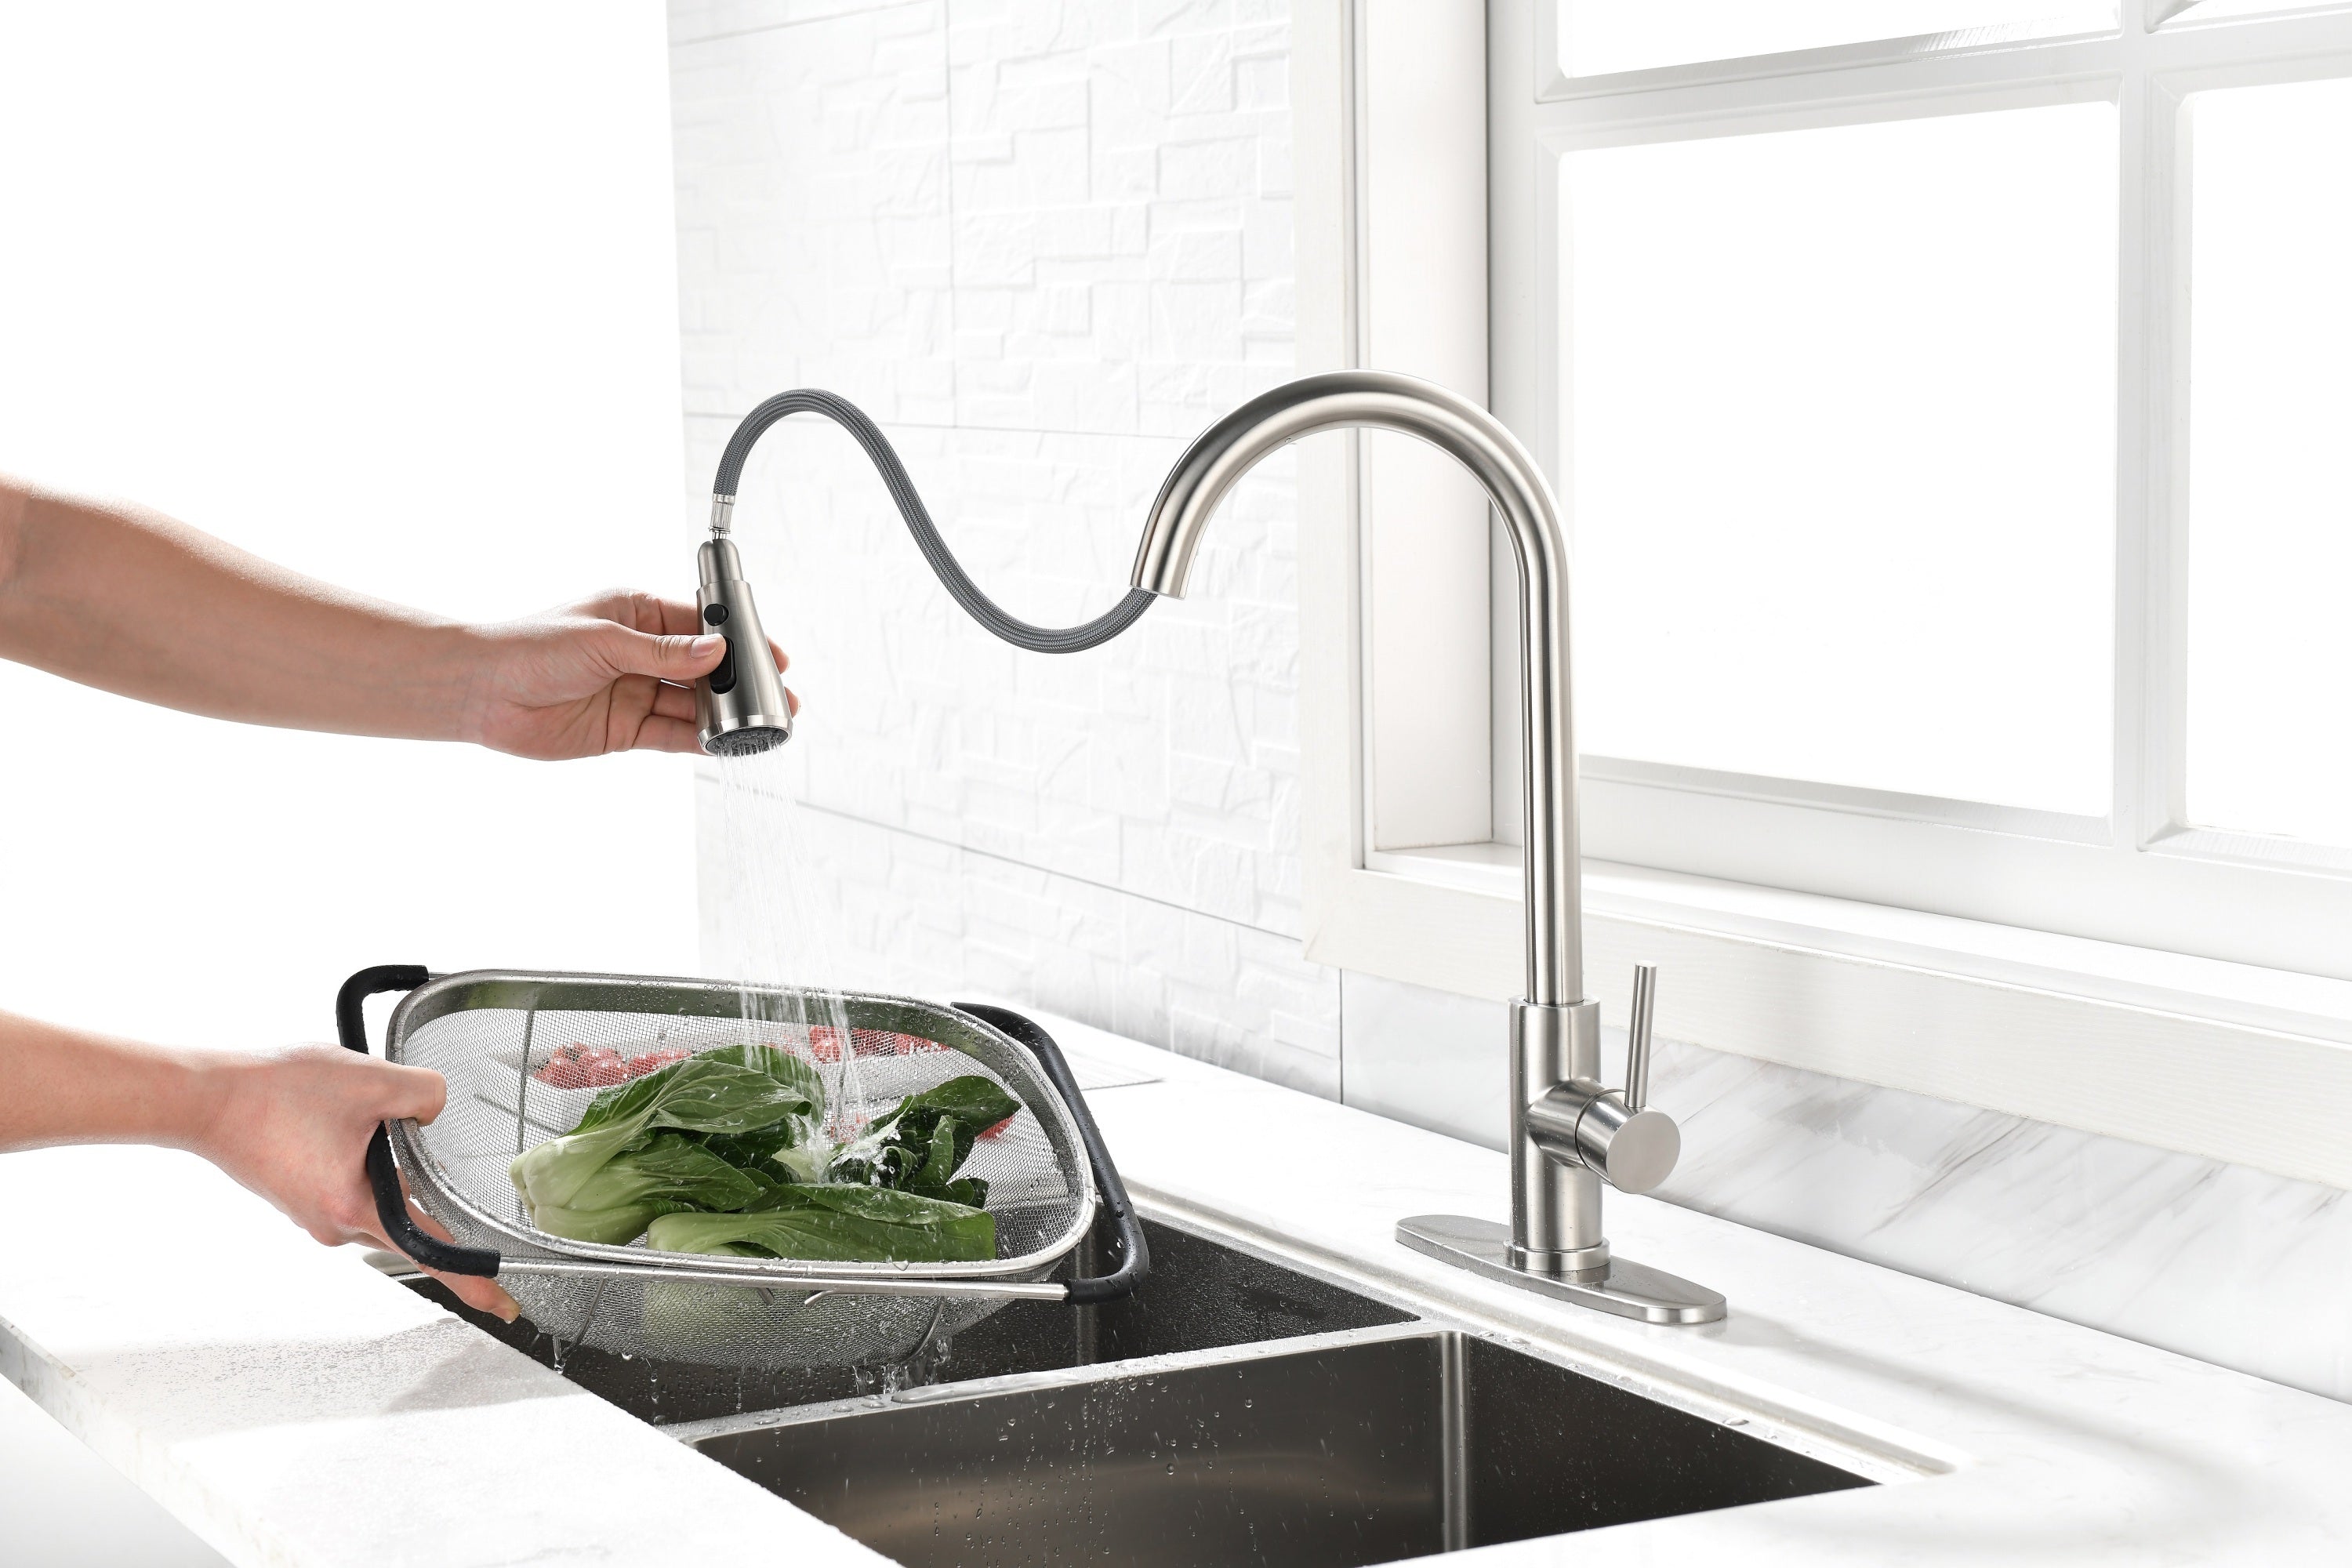 Single Handle High Arc Brushed Nickel Pull Out Kitchen Faucet, Single Level Stainless Steel Kitchen Sink Faucets with Pull Down Sprayer